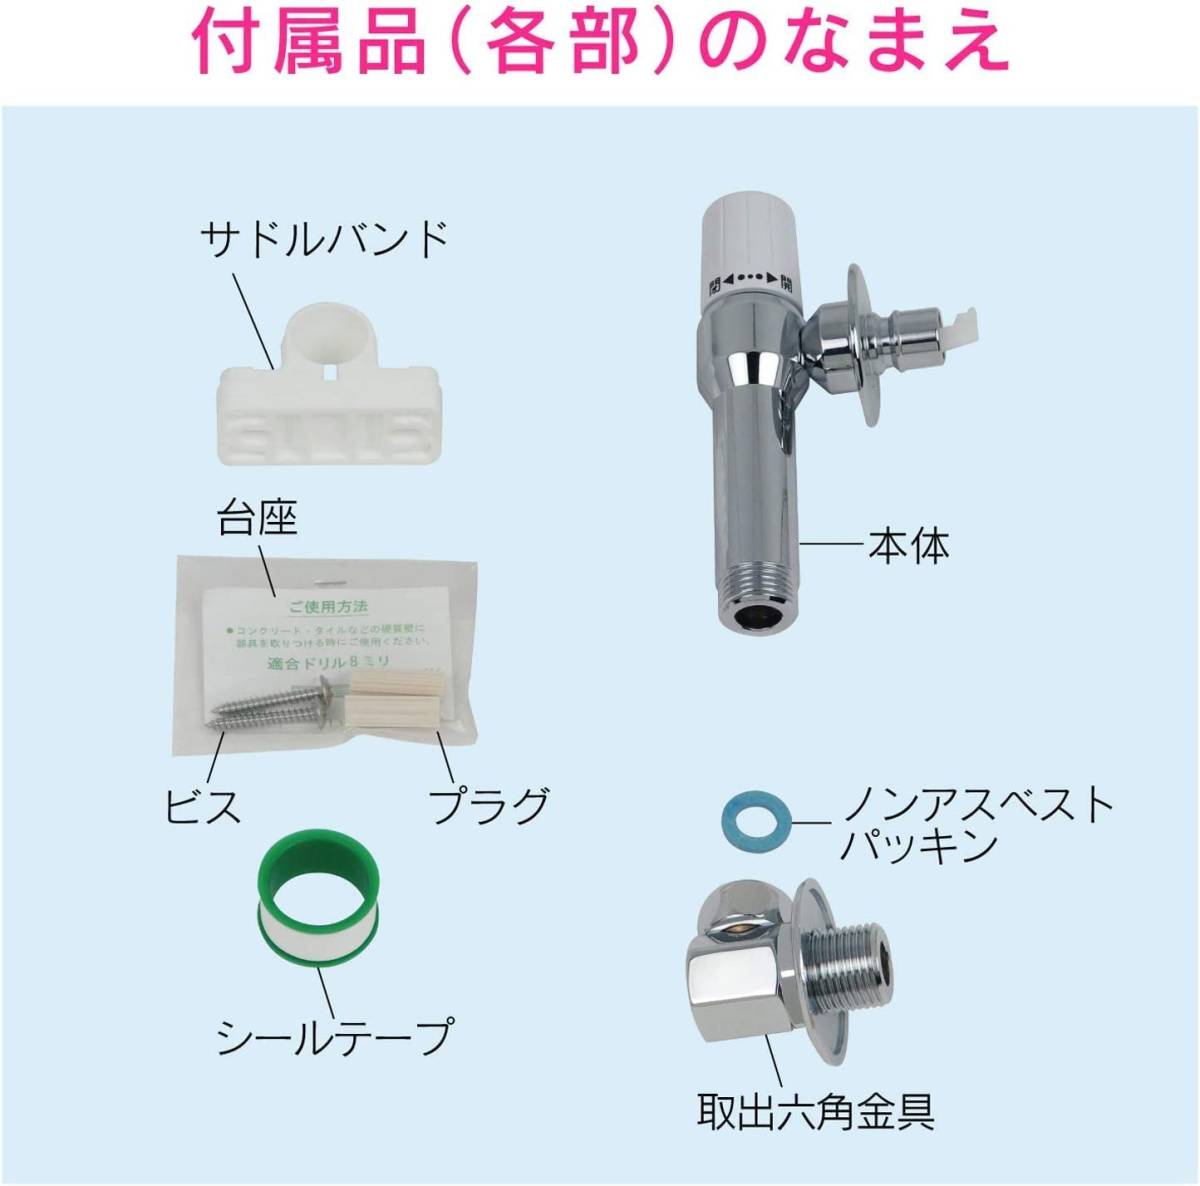  new goods / wall / faucet / height 10cm up / drum washing machine correspondence / water leak prevention measures settled / seal tape / saddle band fixation ①